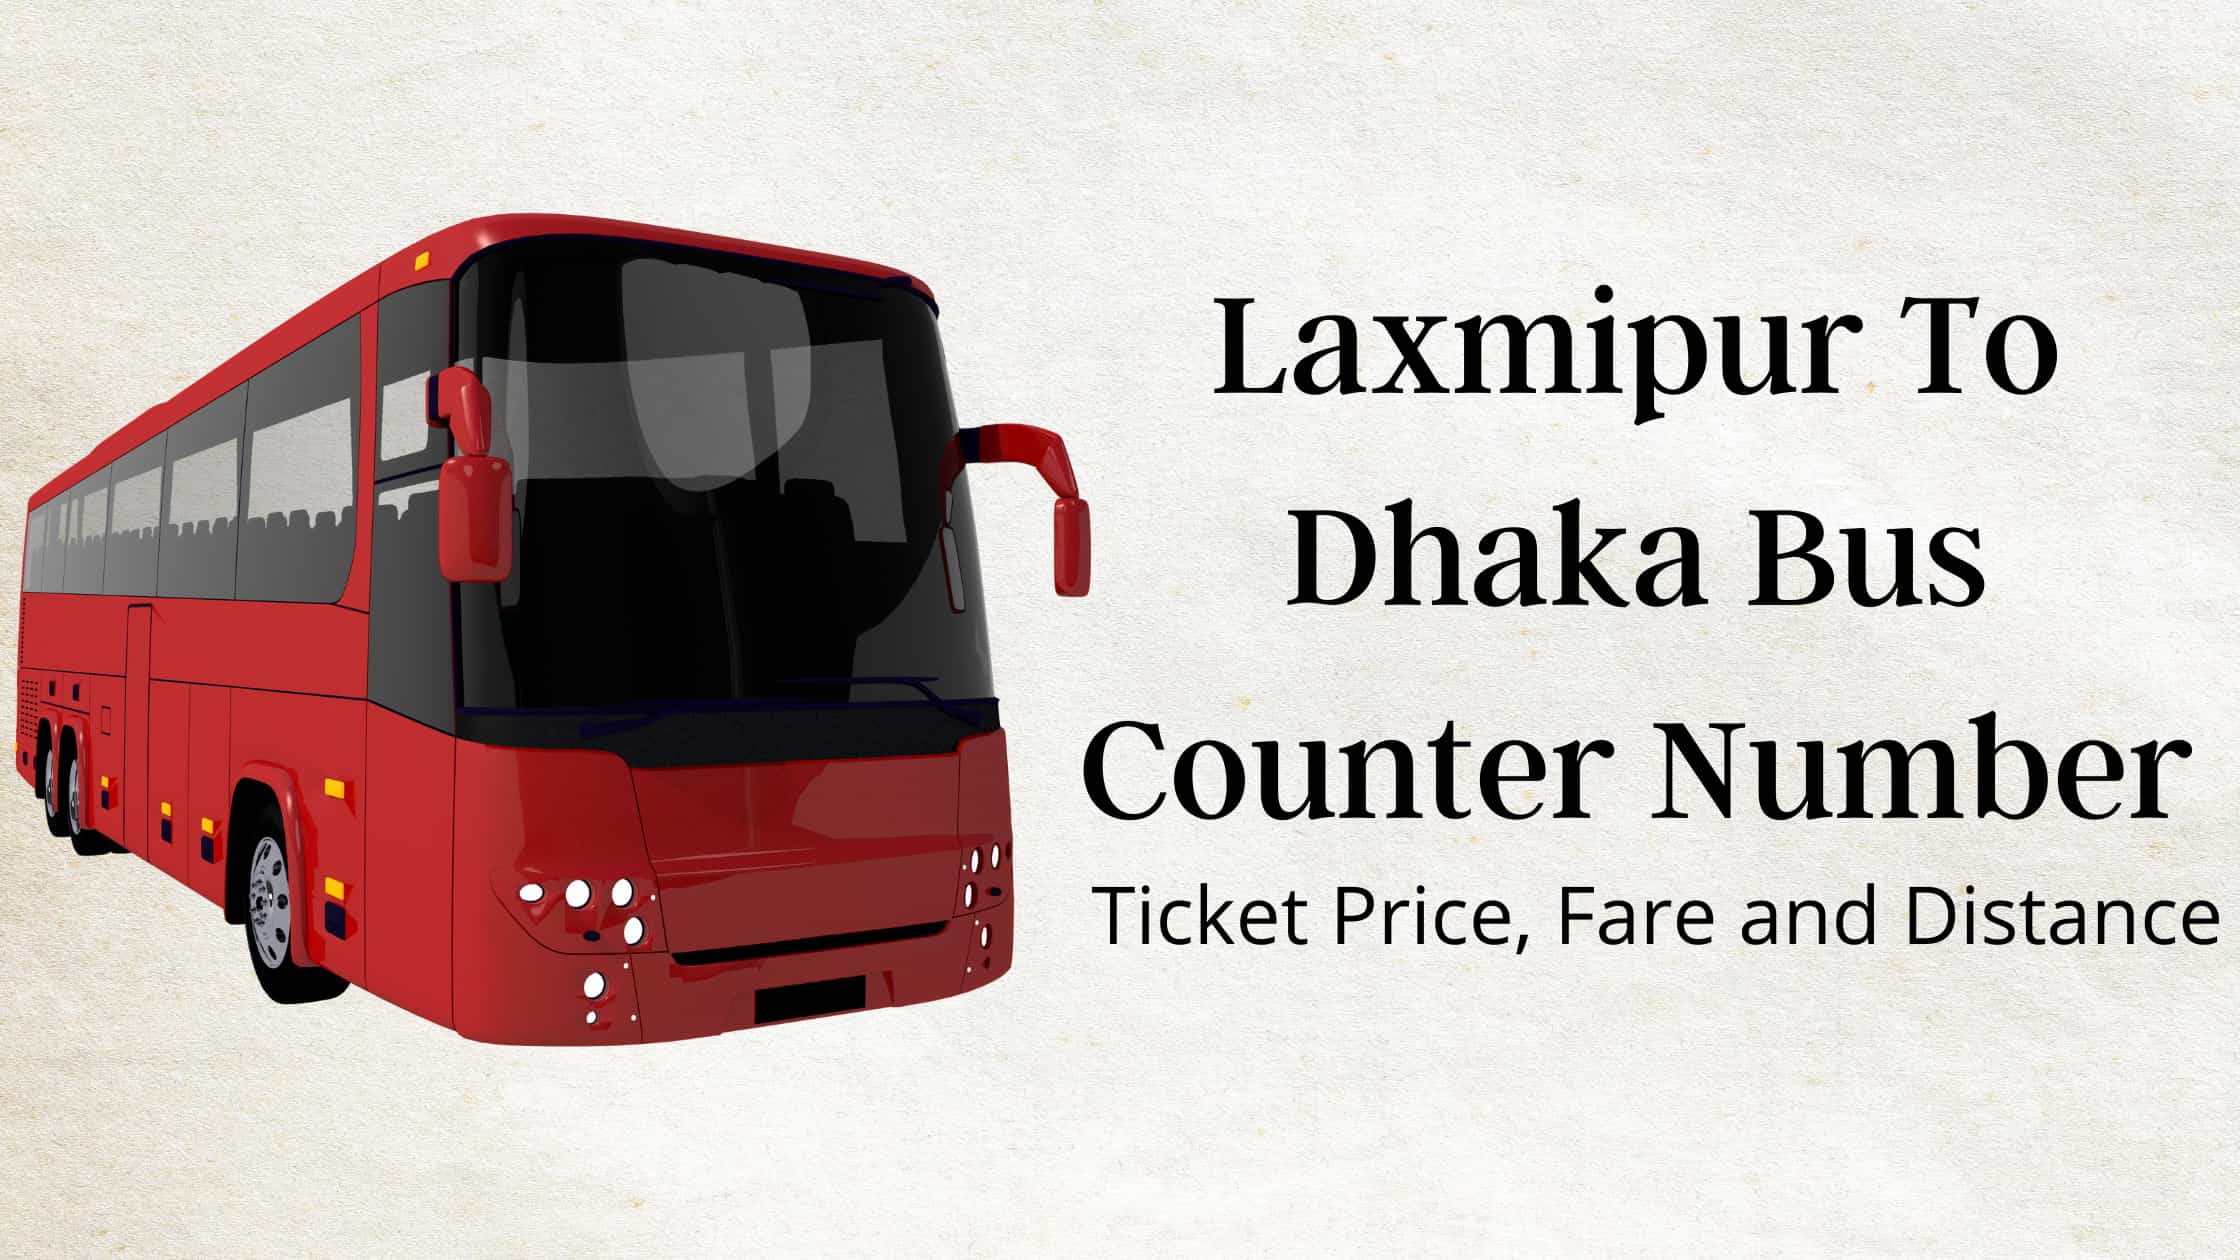 Laxmipur To Dhaka Bus Counter Number, Ticket Price, Fare and Distance